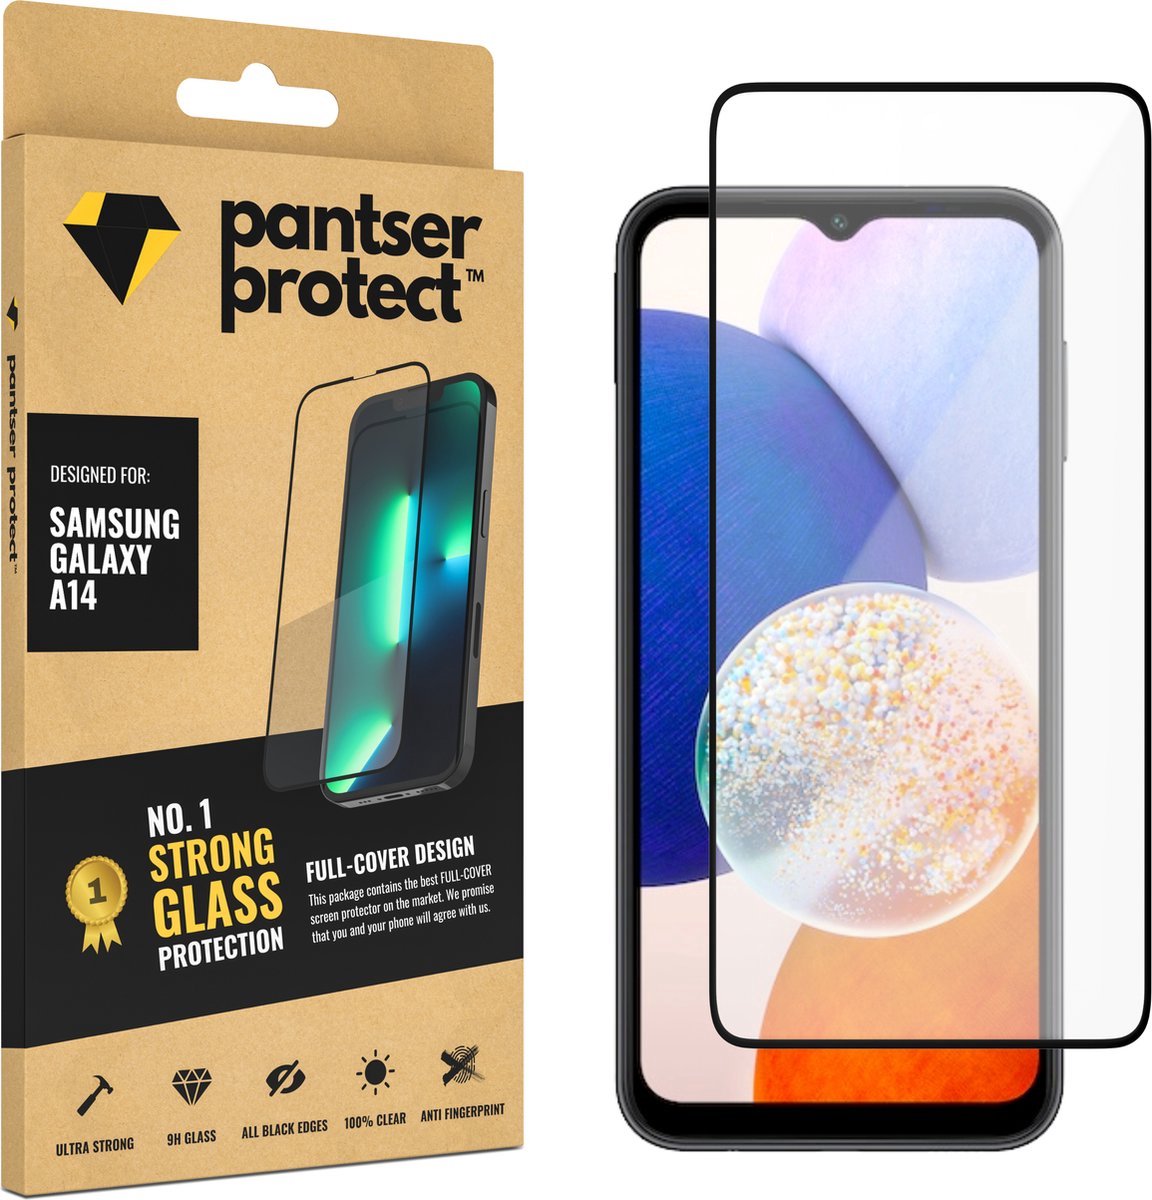 Pantser Protect™ Glass Screenprotector Geschikt voor Samsung Galaxy A14 - Case Friendly & Full Cover - Premium Pantserglas - Glazen Screen Protector